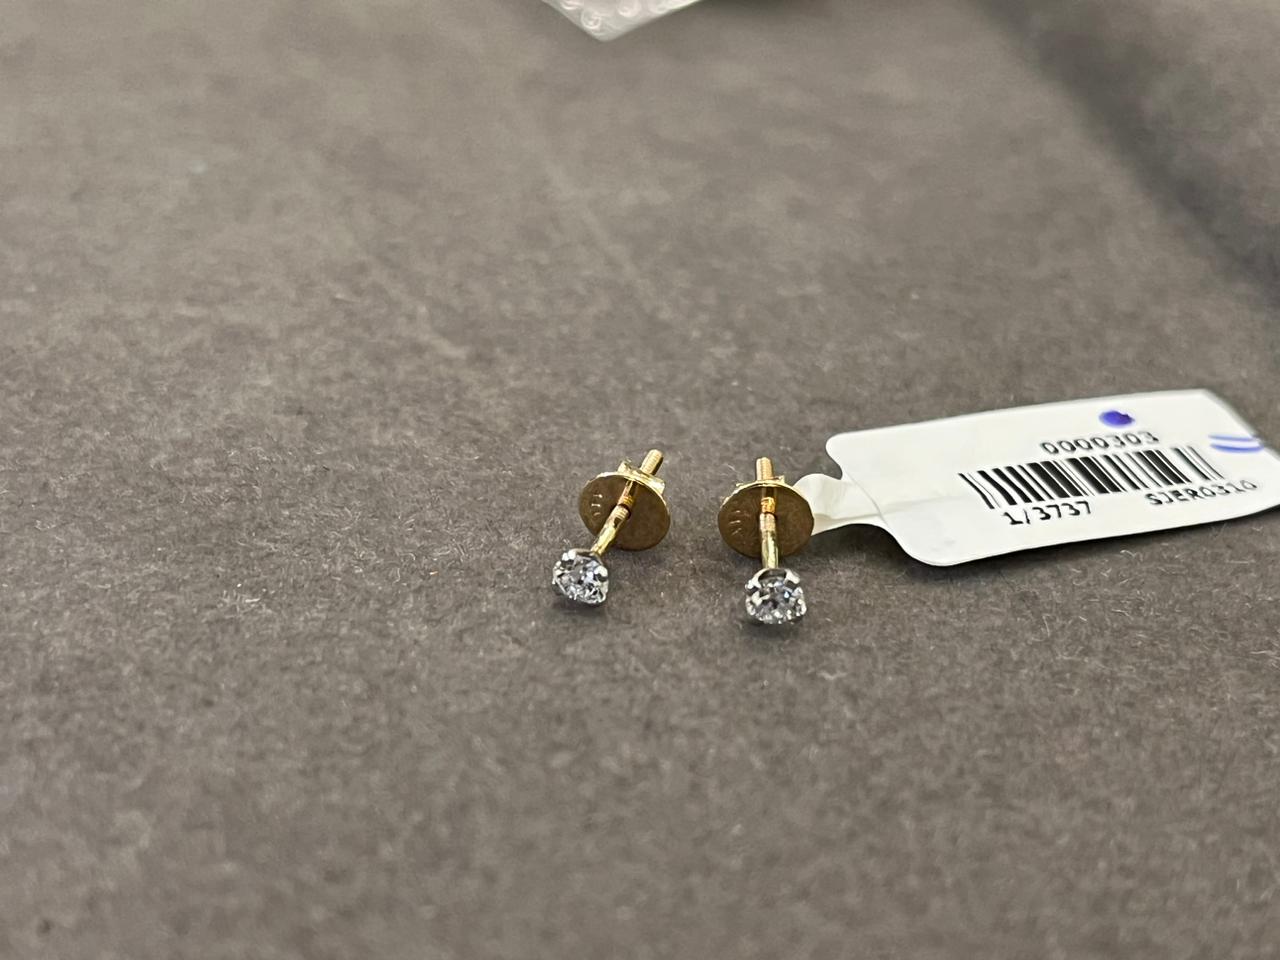 10 Cent Each Ear Pair of ROUND CUT LAB GROWN IGI Certified Solitaire Earings in 14Kt Hallmarked Gold